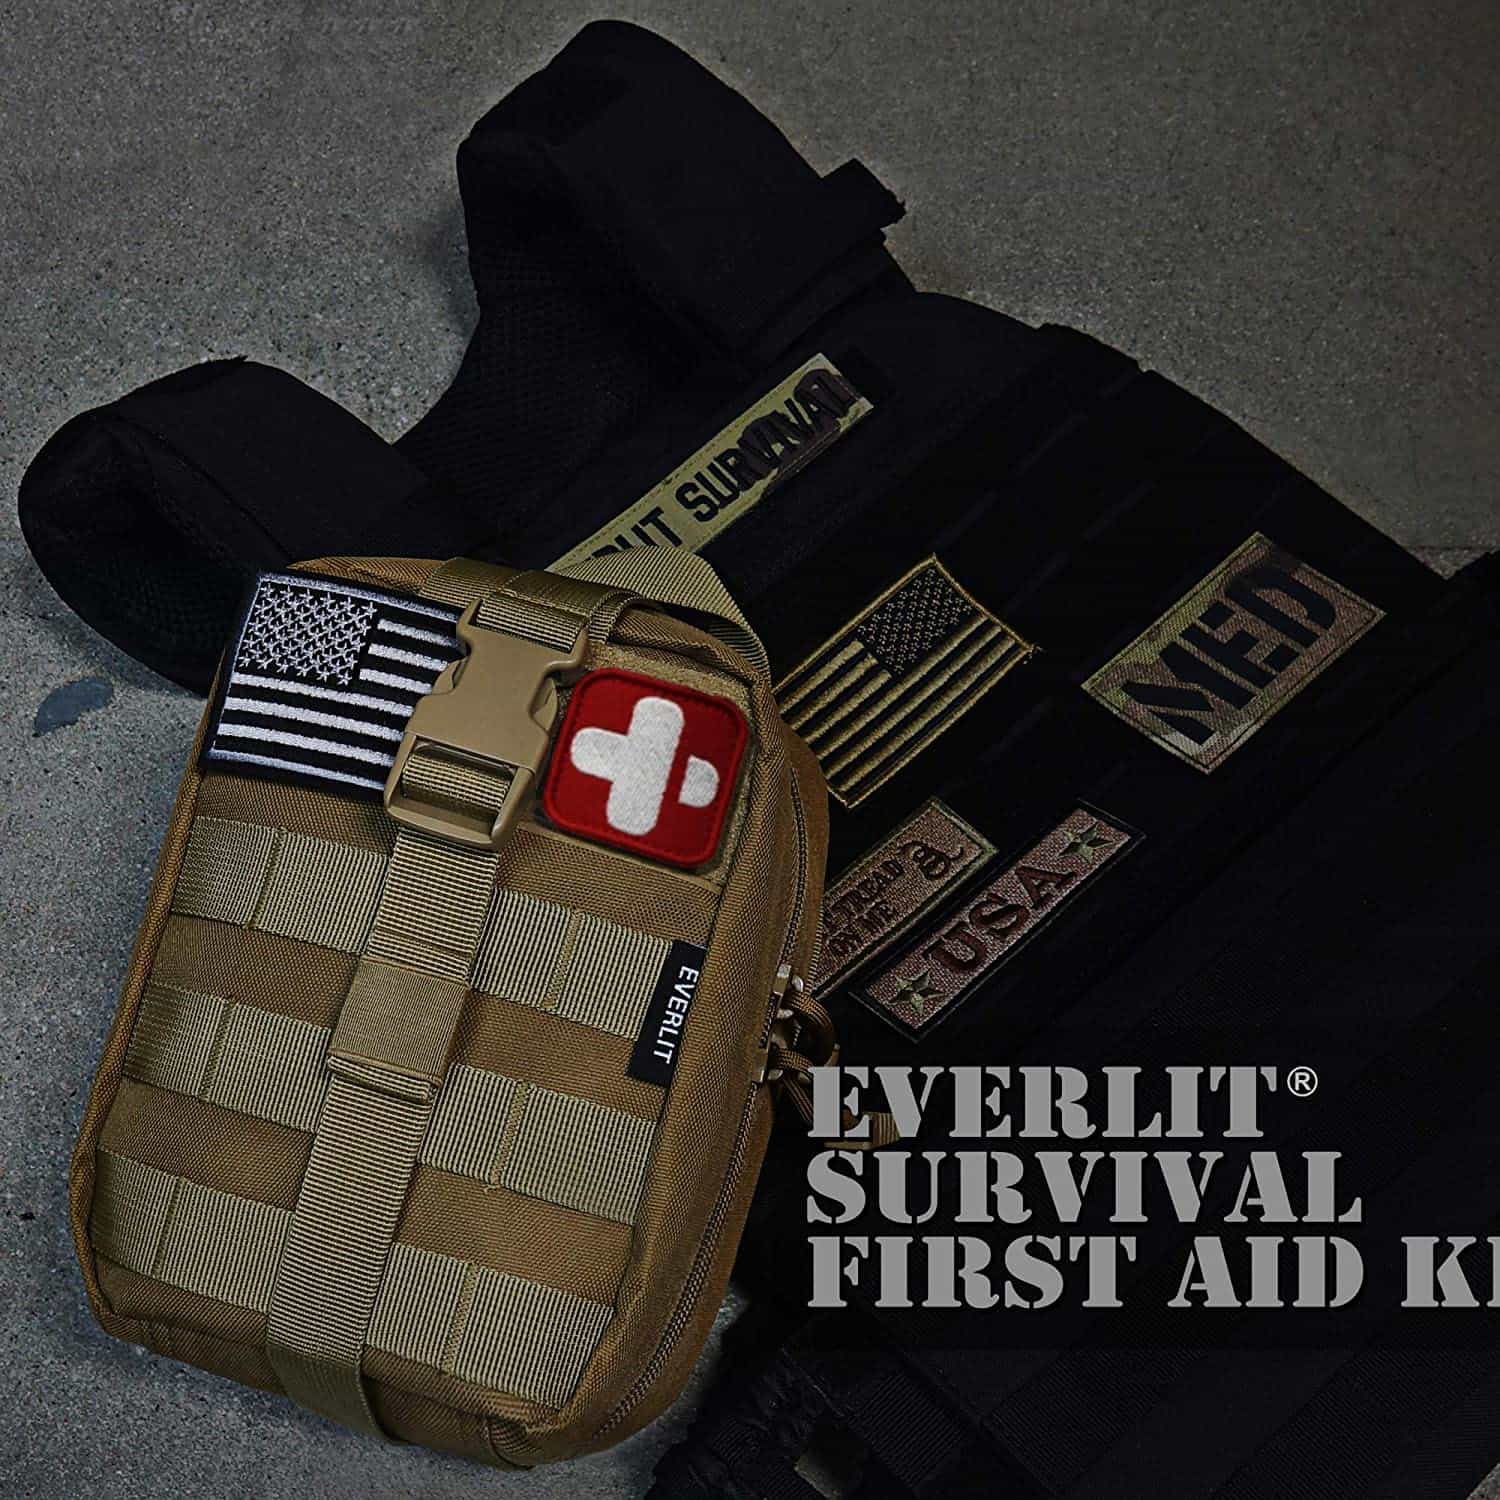 Green Survival First Aid Kit Contains Contains 250 Piece First Aid Kit - 3 